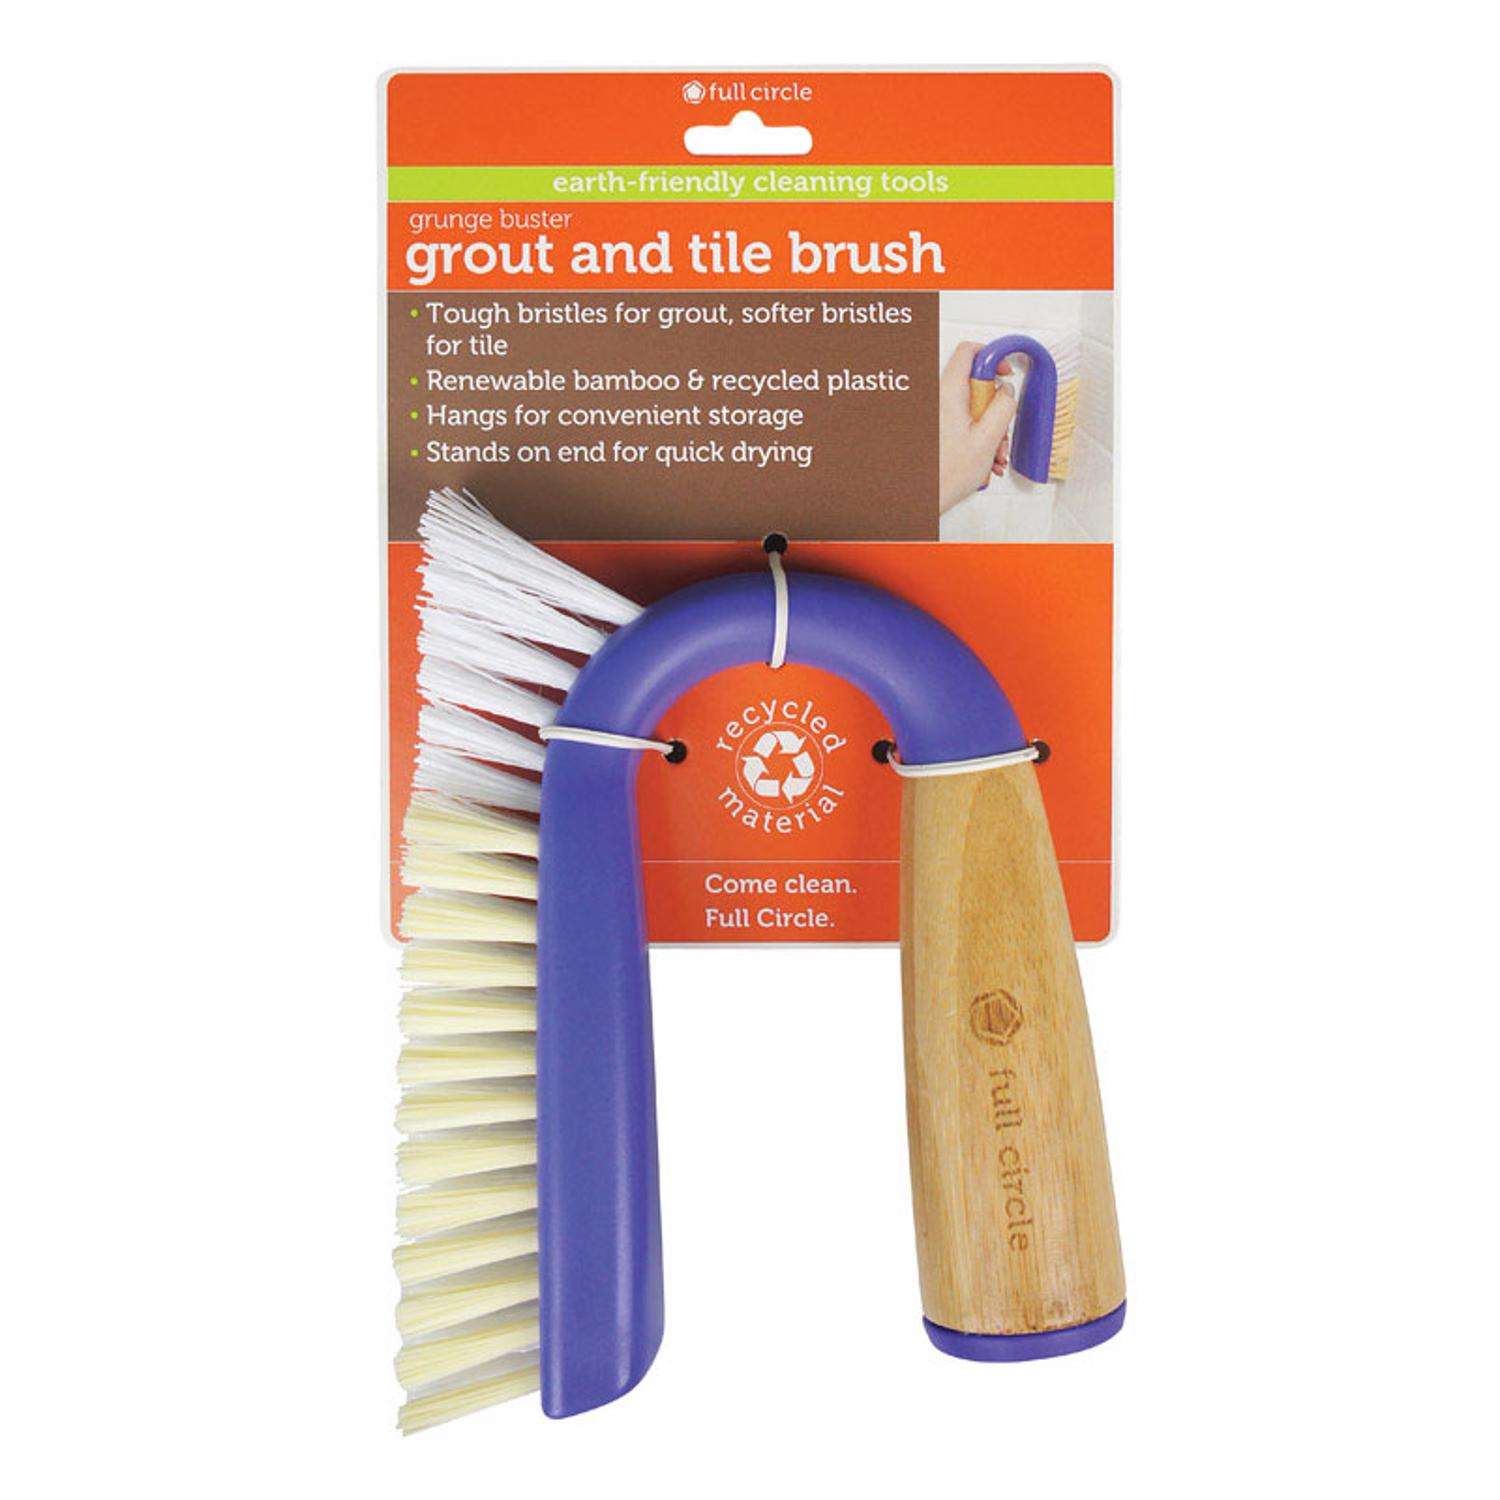 Full Circle Home Grunge Buster Tile and Grout Brush